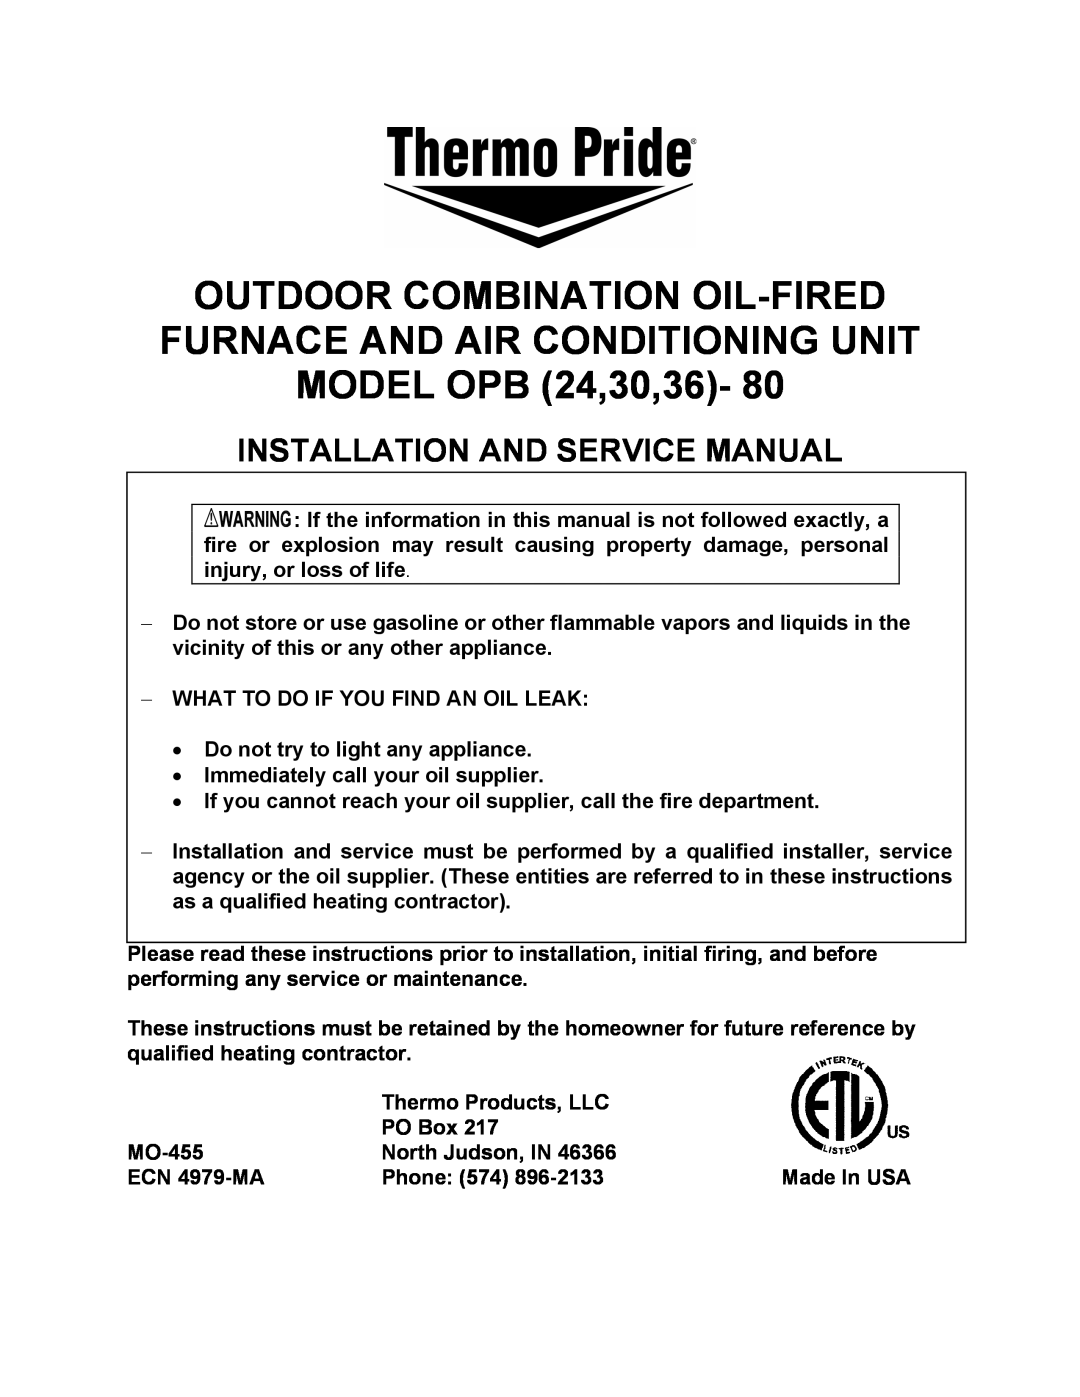 Thermo Products 36)- 80, OPB (24, 30 service manual 